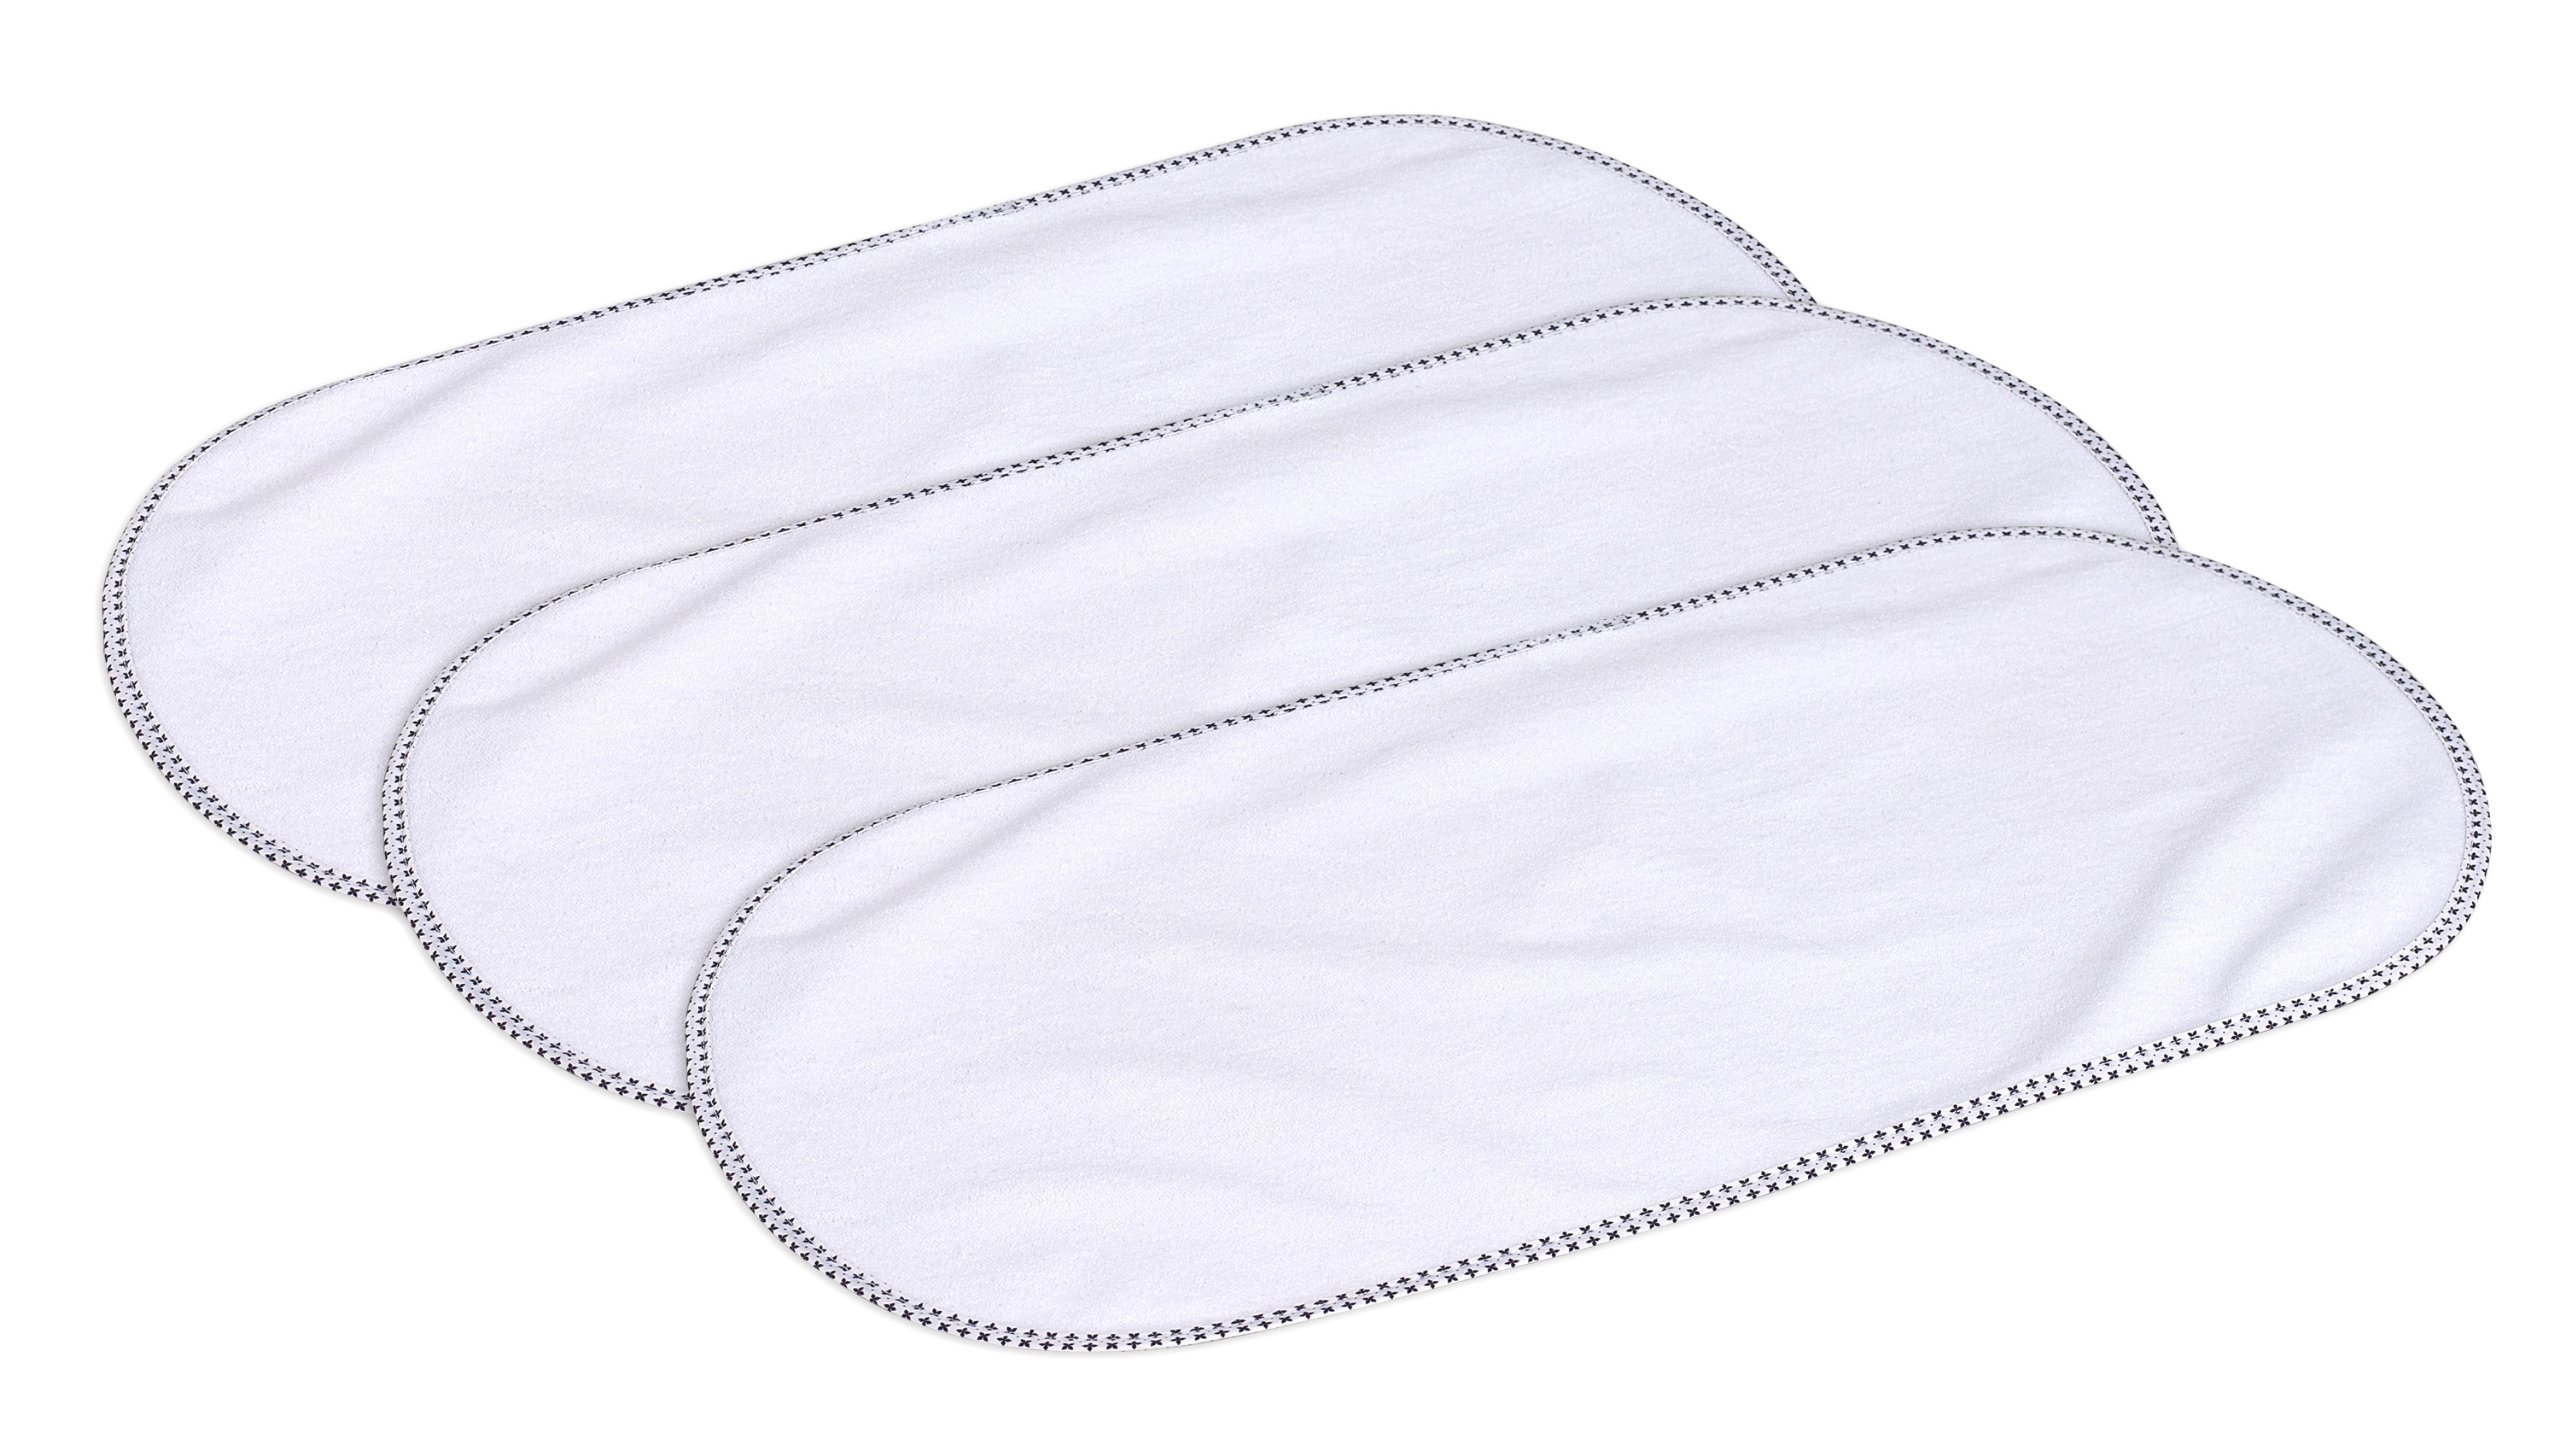 Munchkin® Waterproof Changing Pad Liners, 3 Count